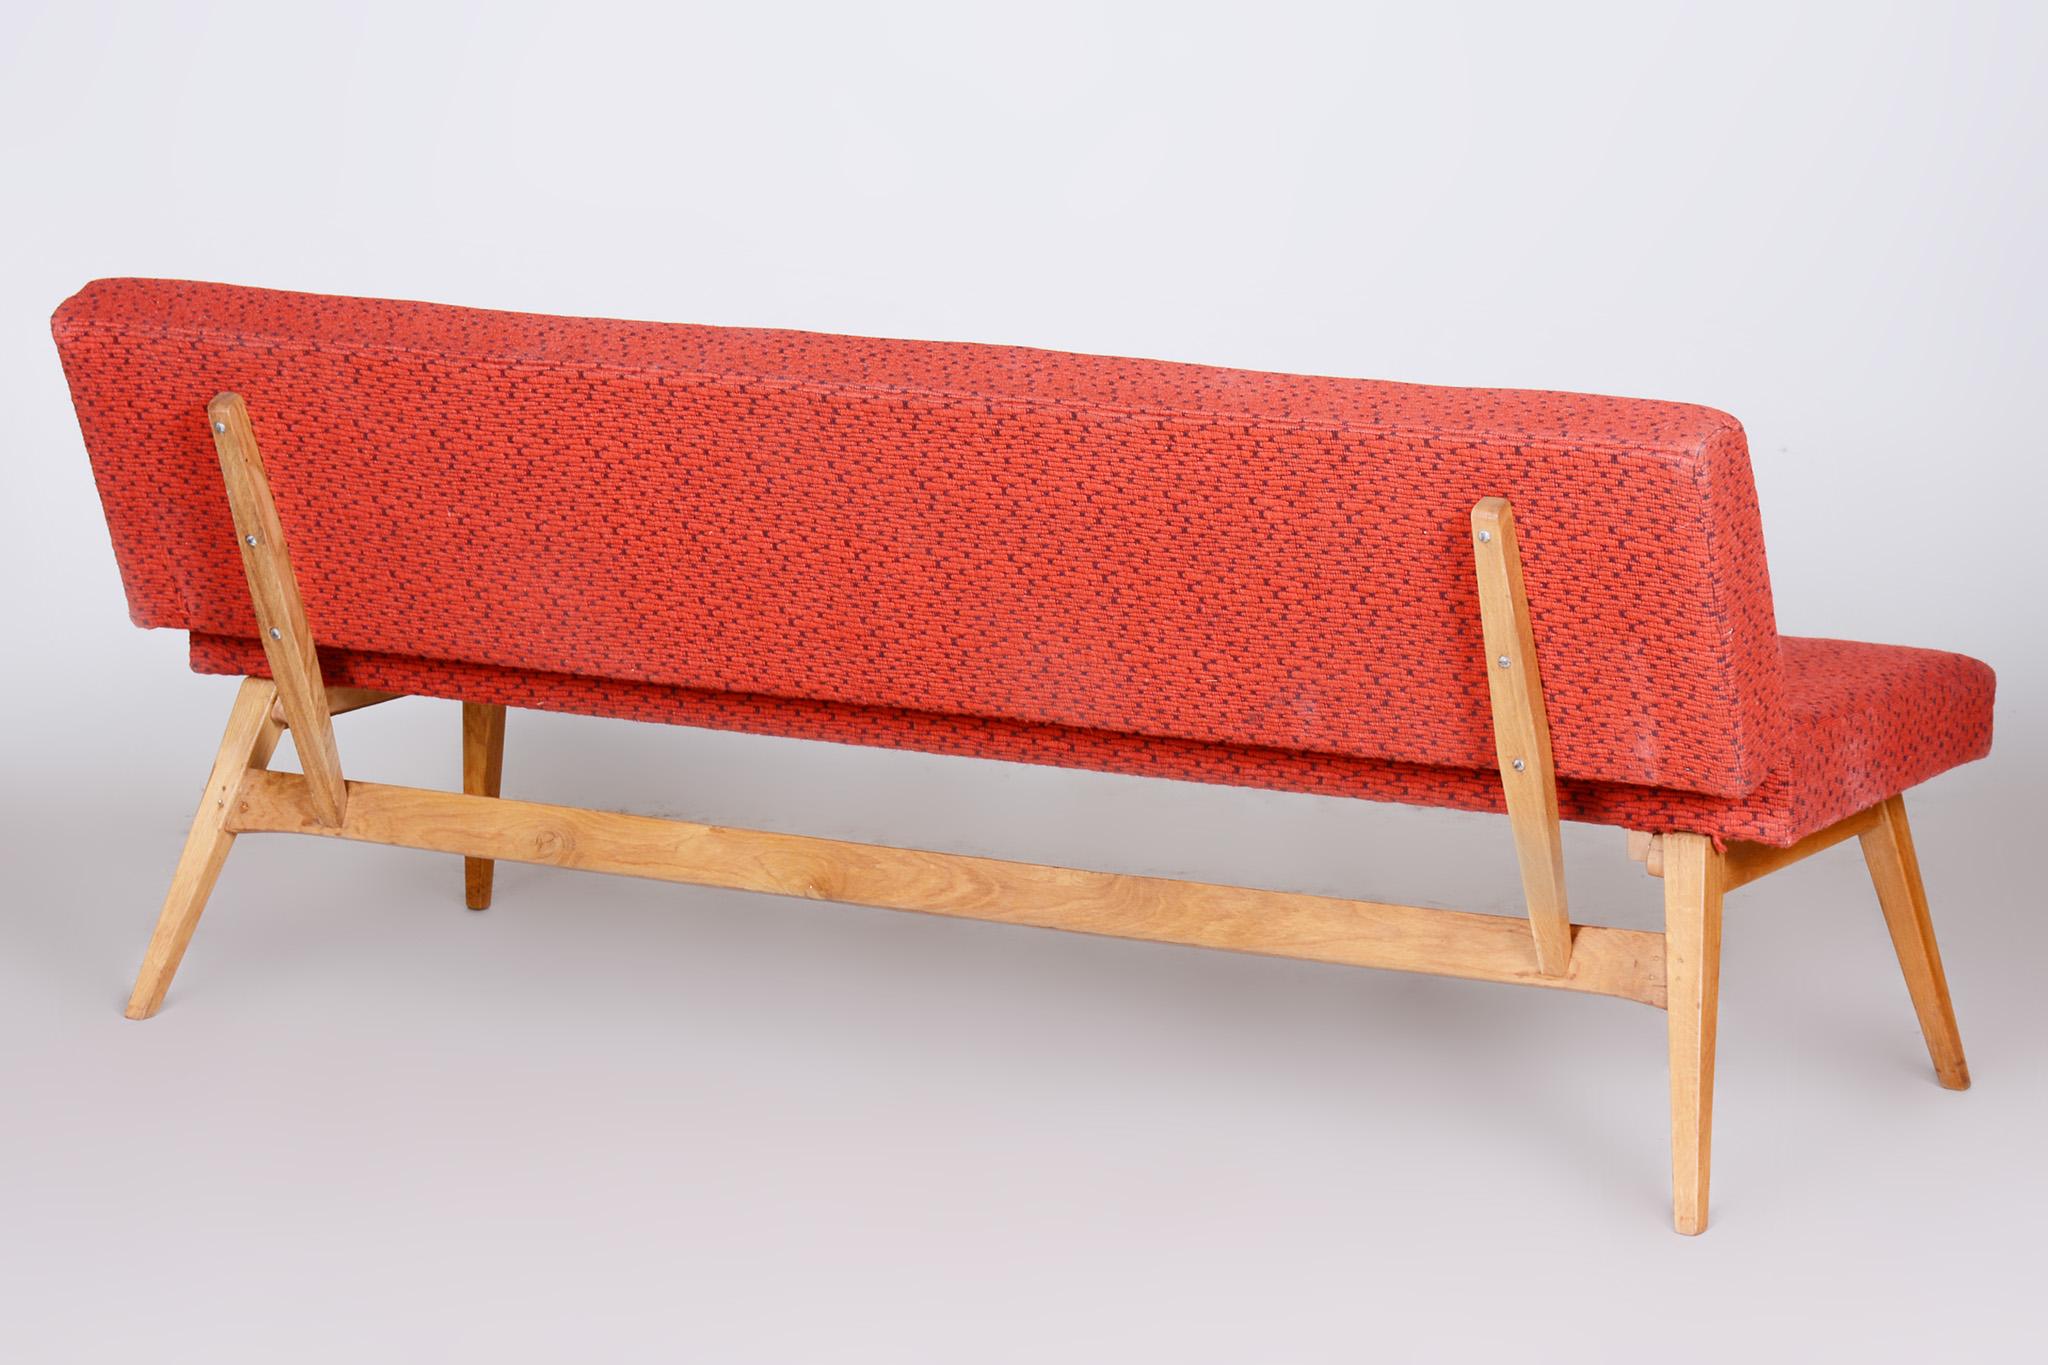 Red Midcentury Modern Oak Sofa, 1950s, Original well preserved upholstery For Sale 2